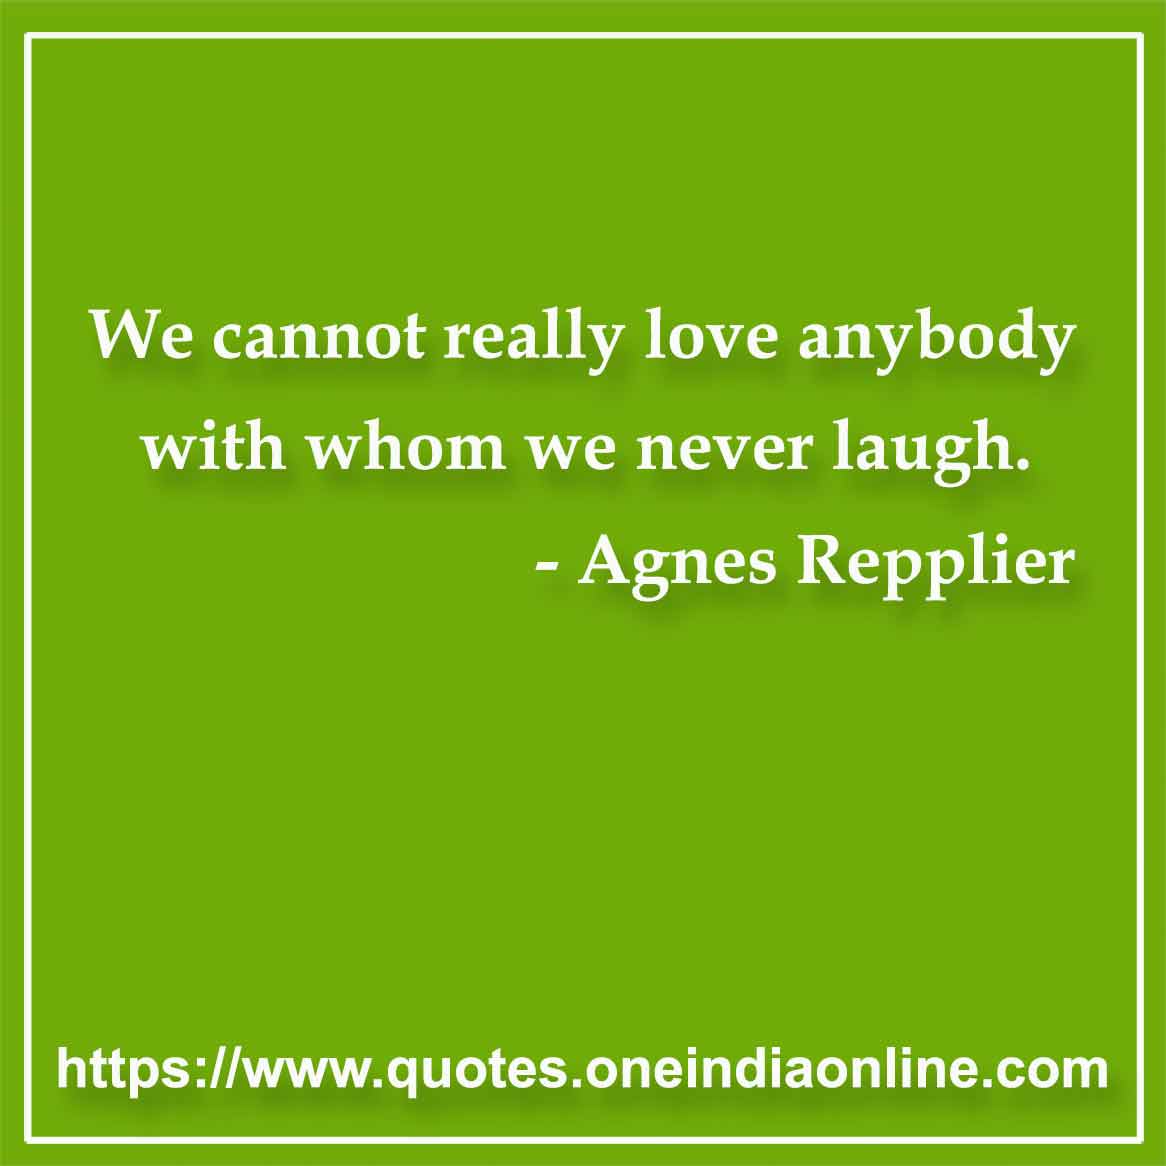 We cannot really love anybody with whom we never laugh.

- Laughter Quotes by Agnes Repplier